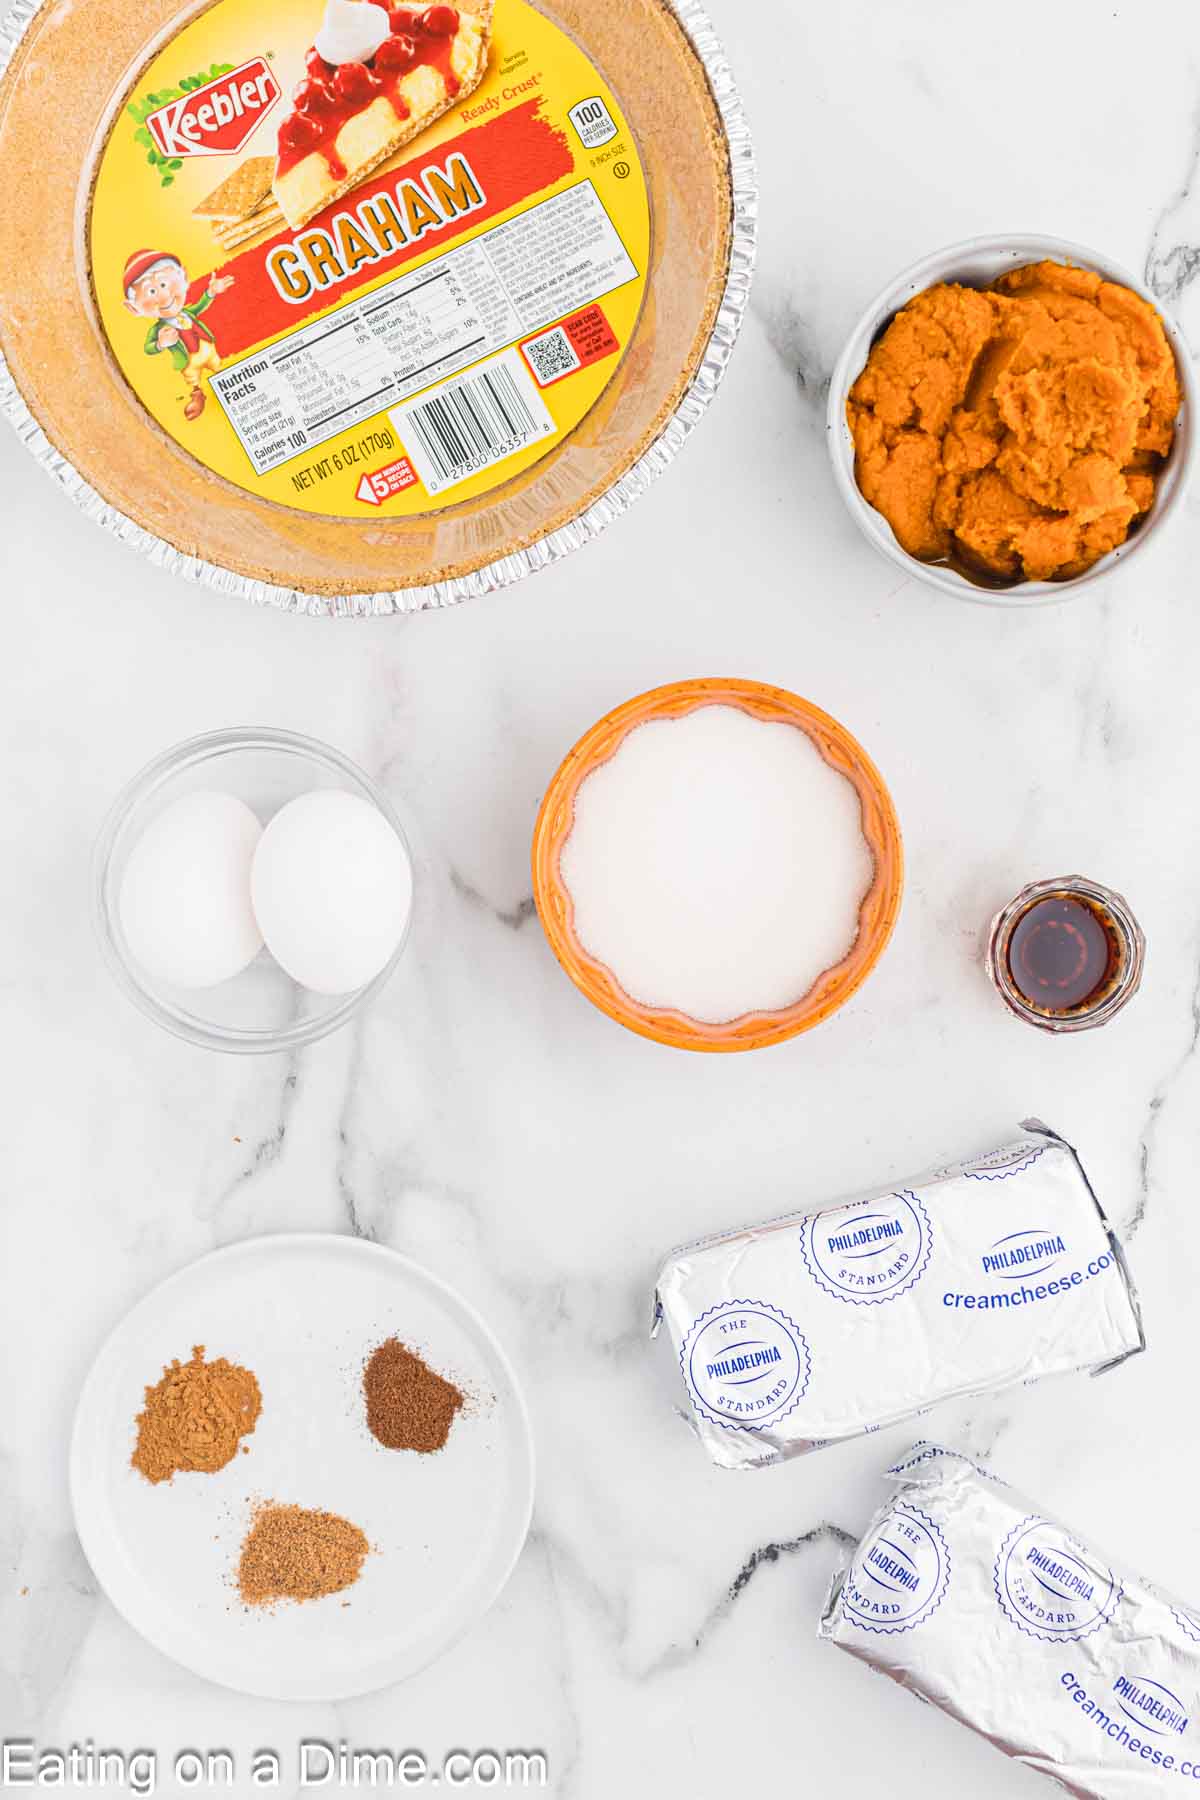 Top view of various ingredients for making a pumpkin cheesecake on a marble surface. Visible are a Keebler graham pie crust, a bowl of pumpkin puree, two eggs, a bowl of sugar, a plate with spices, two packs of cream cheese, and a small container of vanilla extract.